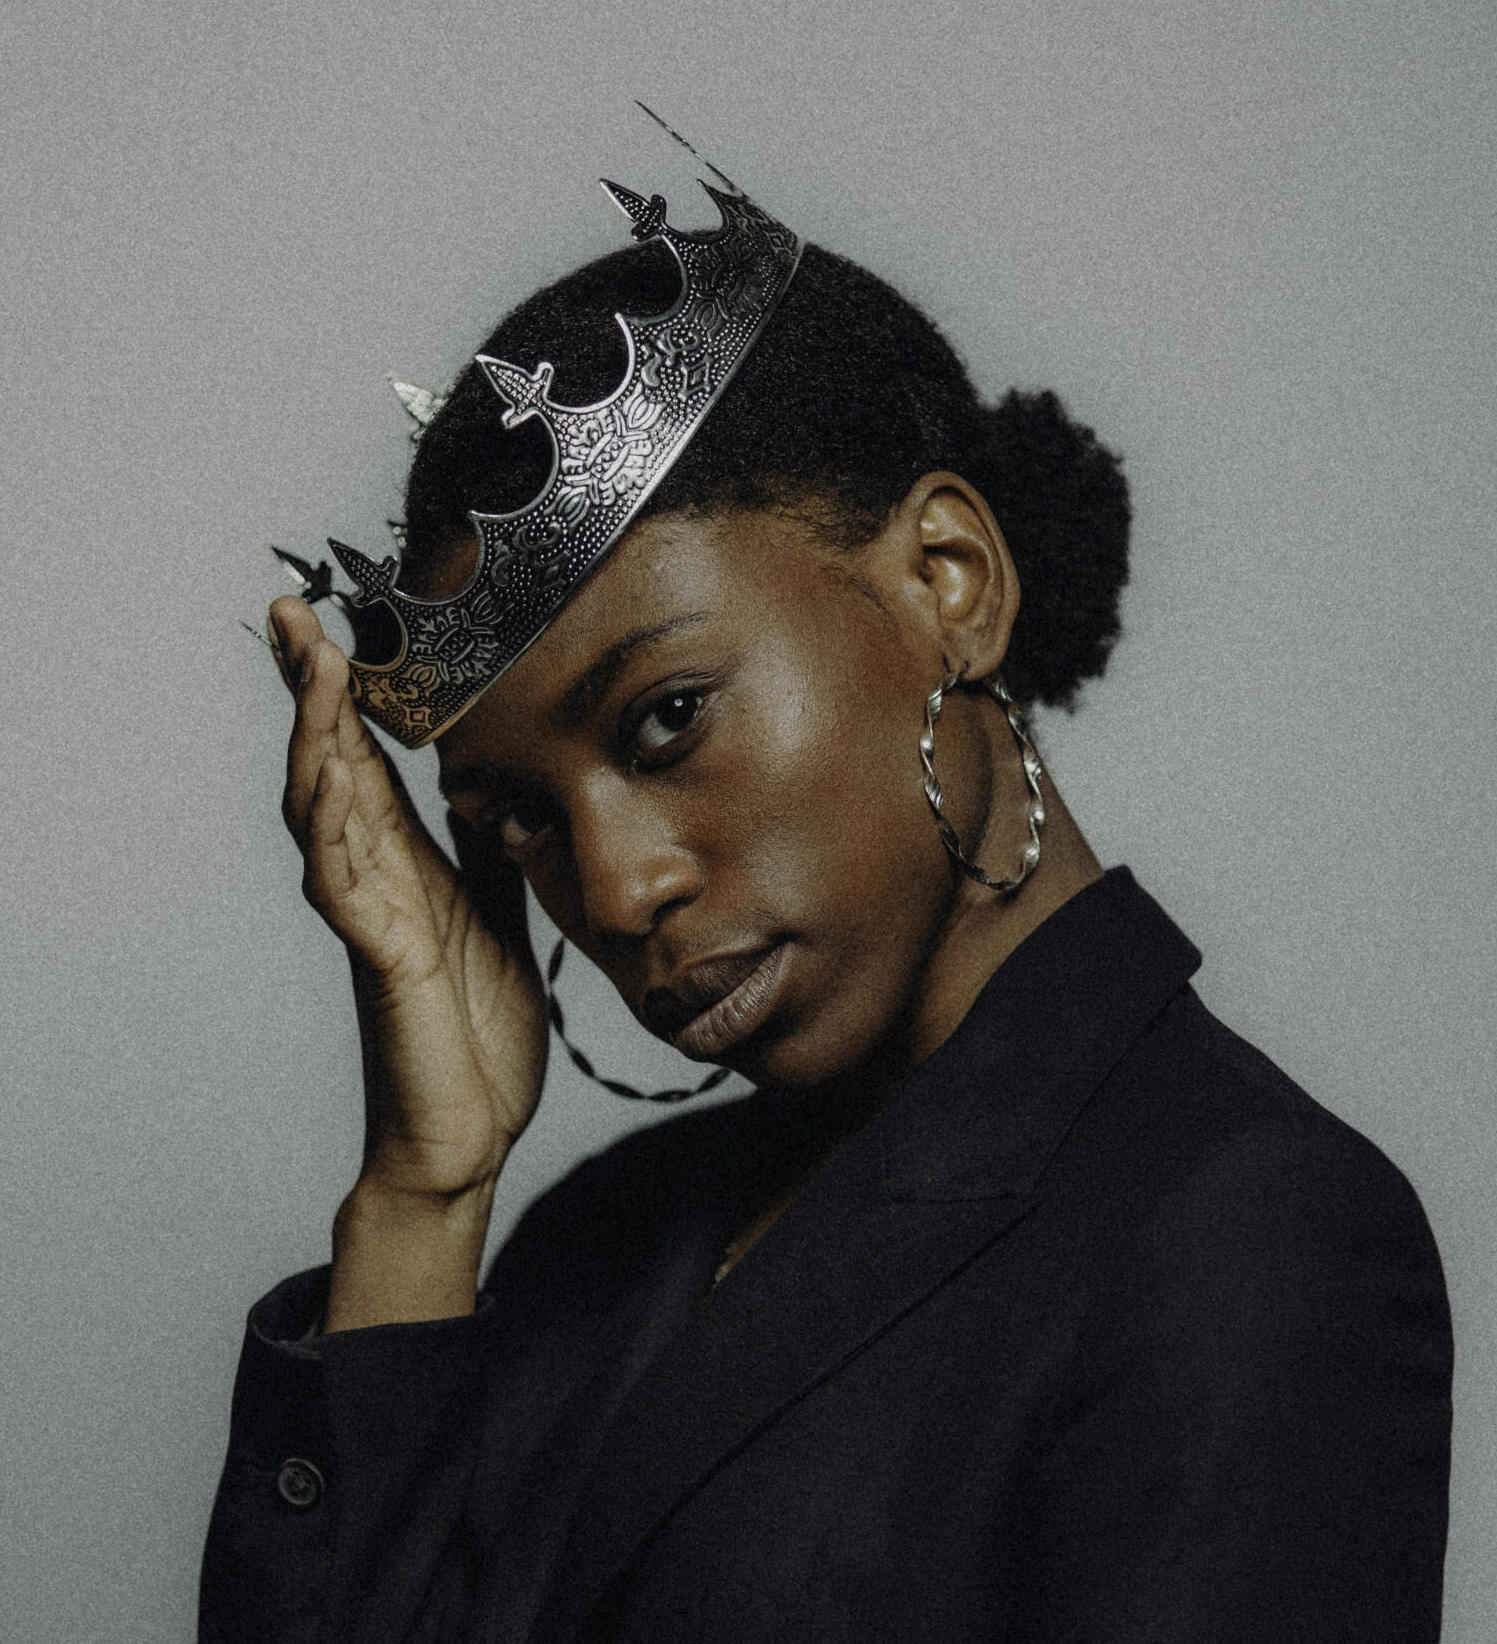 The singer Kokonelle wears a crown and a black blazer and looks directly at the viewer.